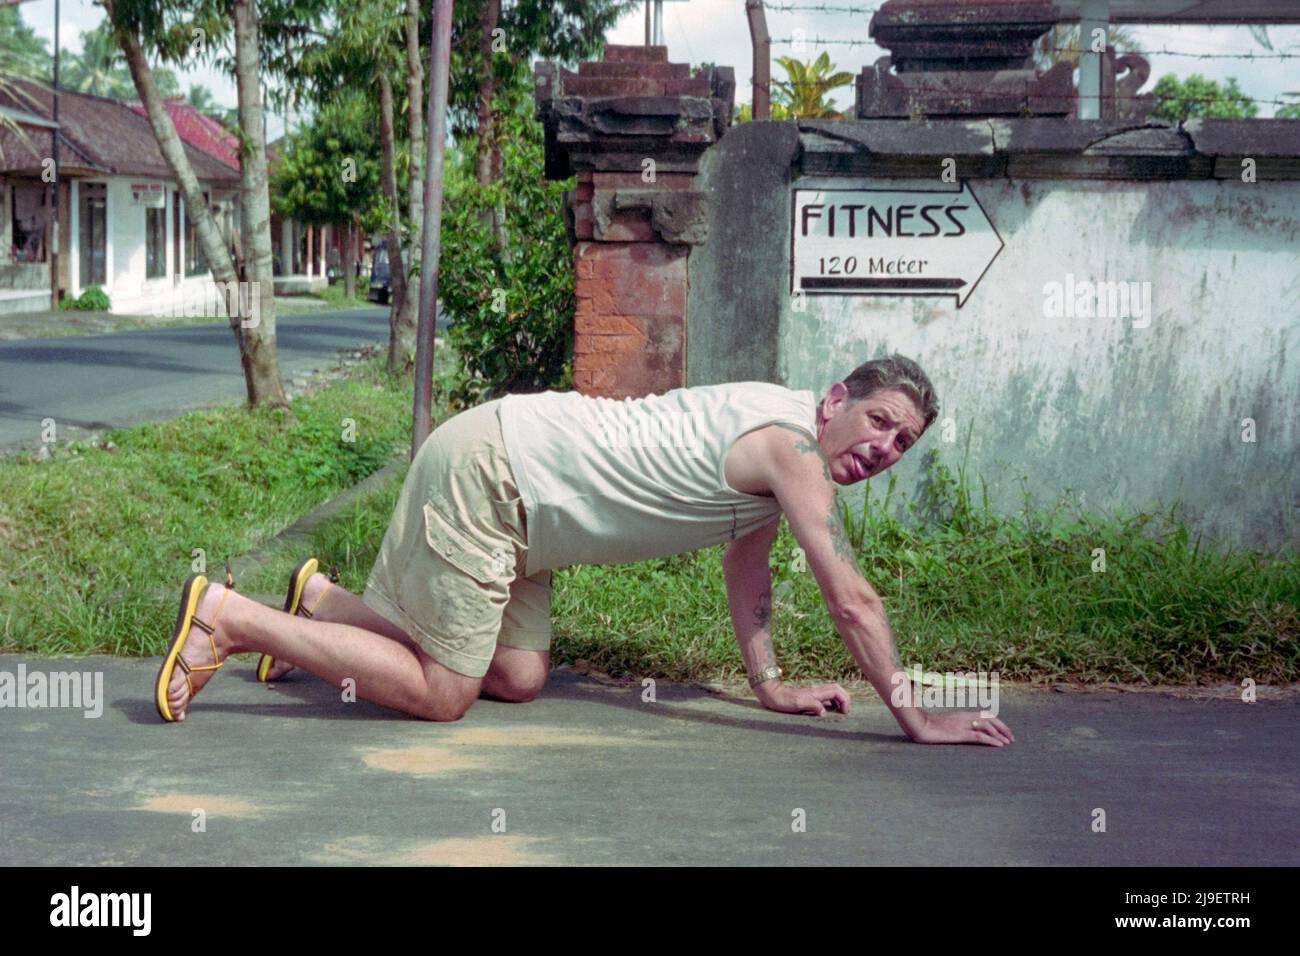 spoof image of exhausted unfit man crawling on hands and knees with sign pointing to fitness centre in background bali indonesia 2004 Stock Photo